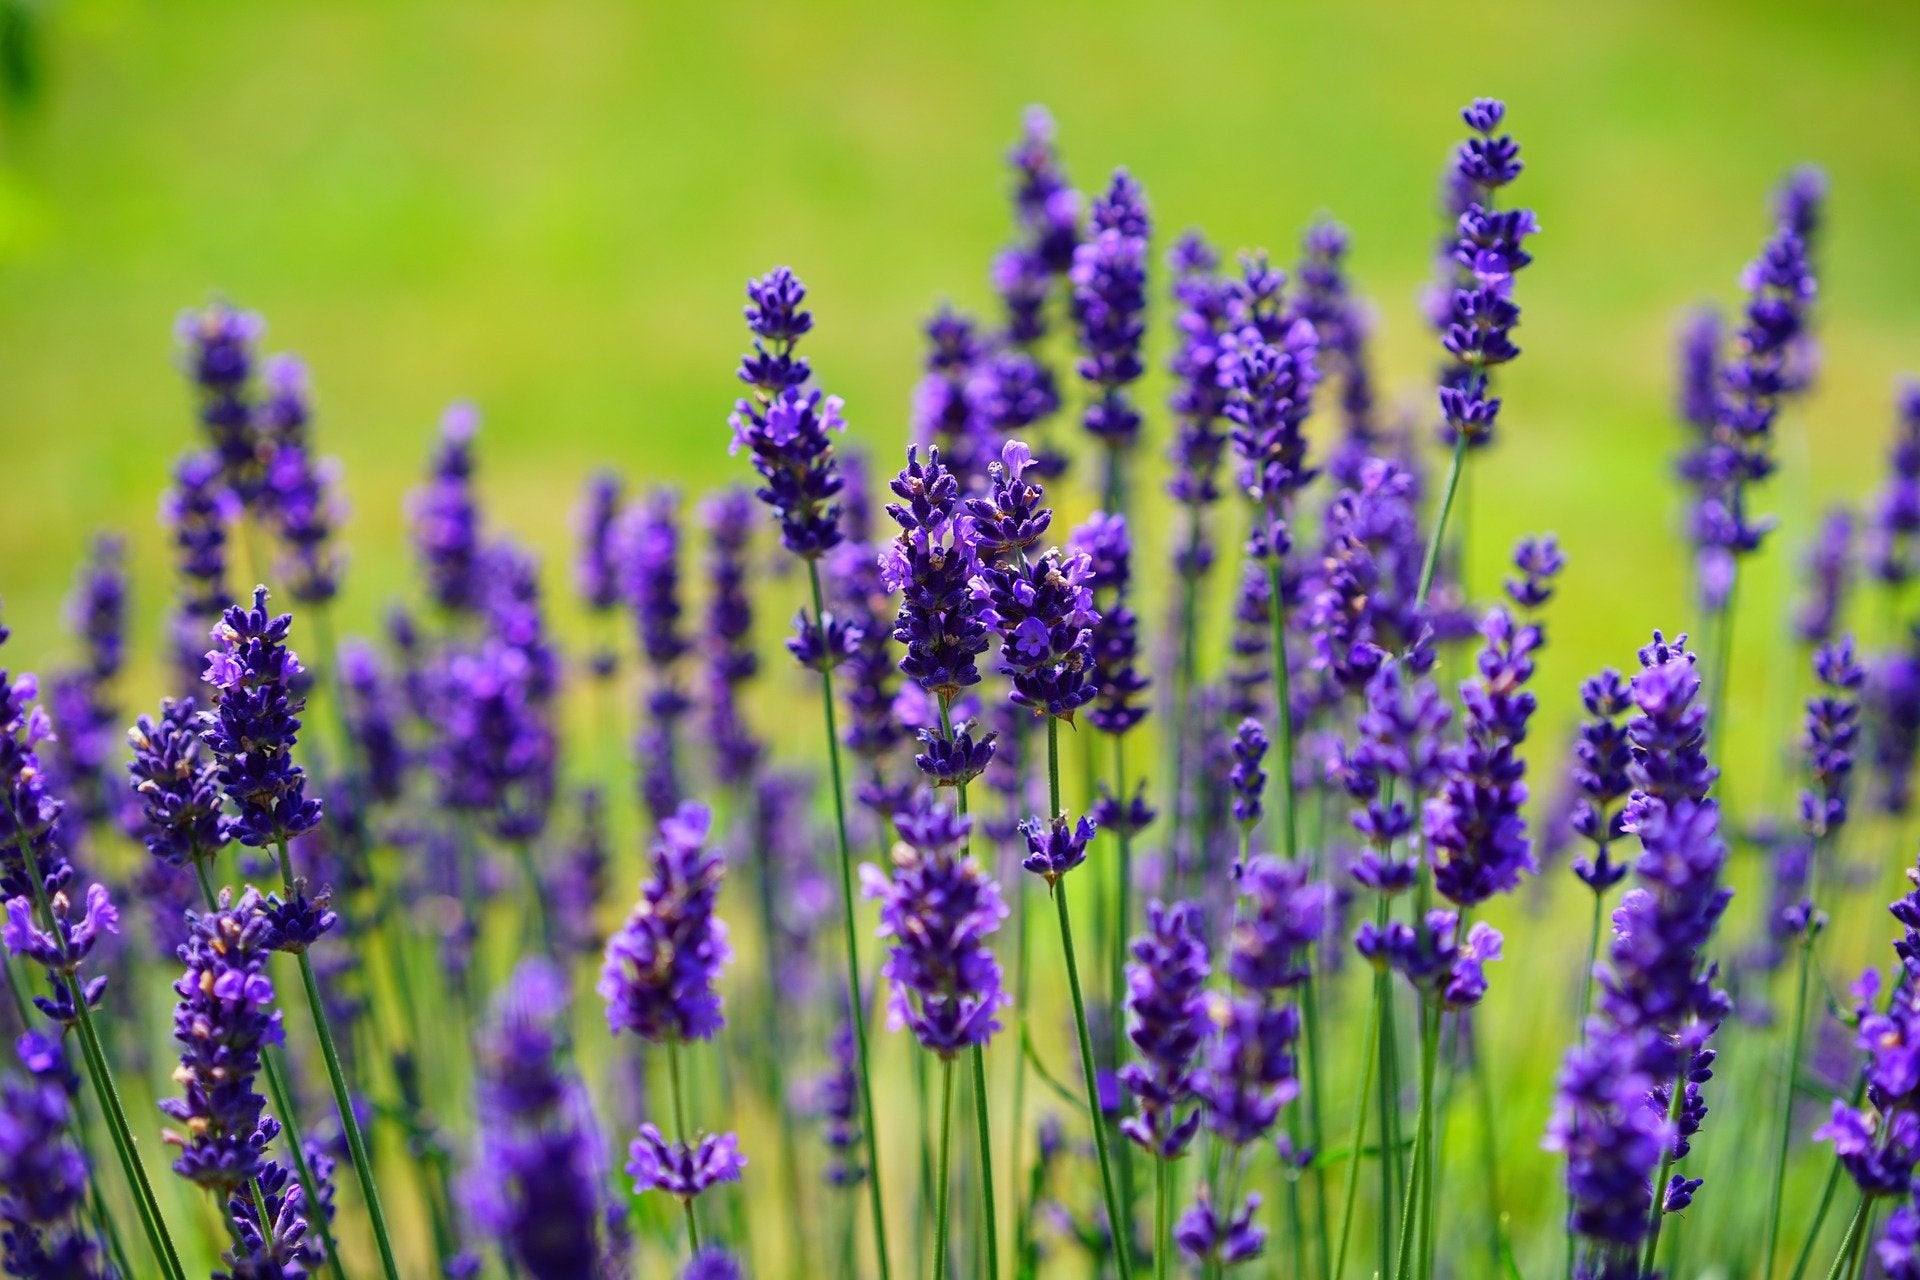 Does Lavender Help with Anxiety?